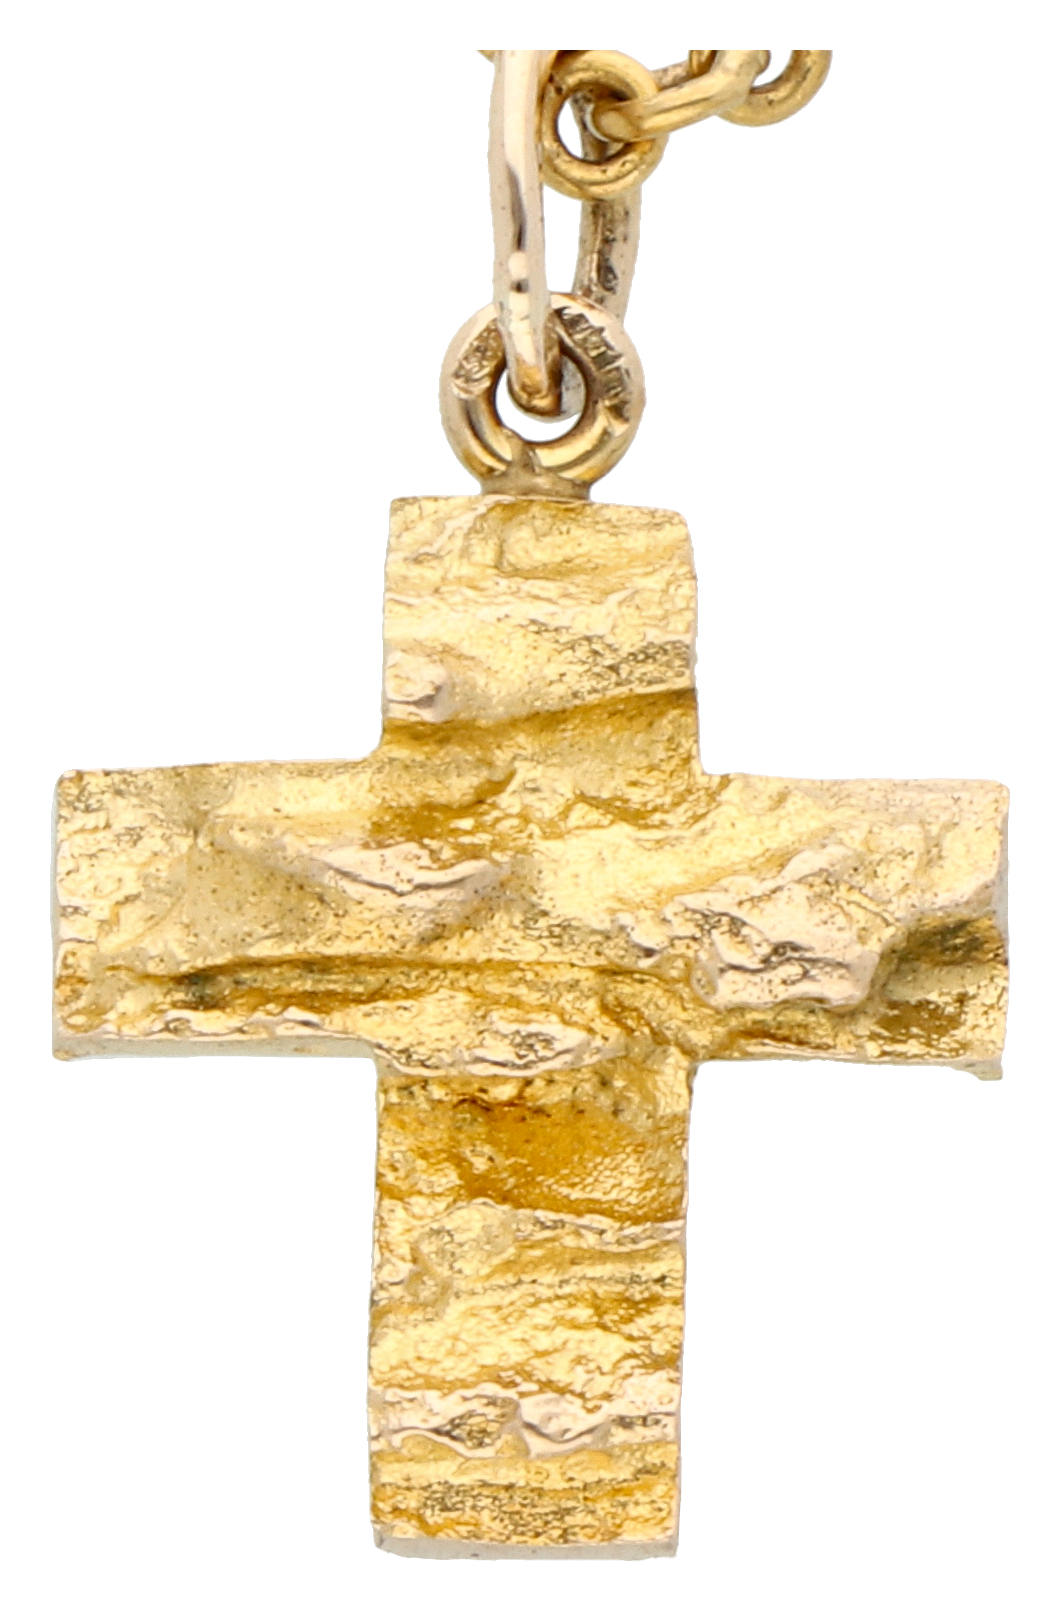 No Reserve - Lapponia 14K yellow gold cross pendant on necklace from the 1970s. - Image 2 of 3